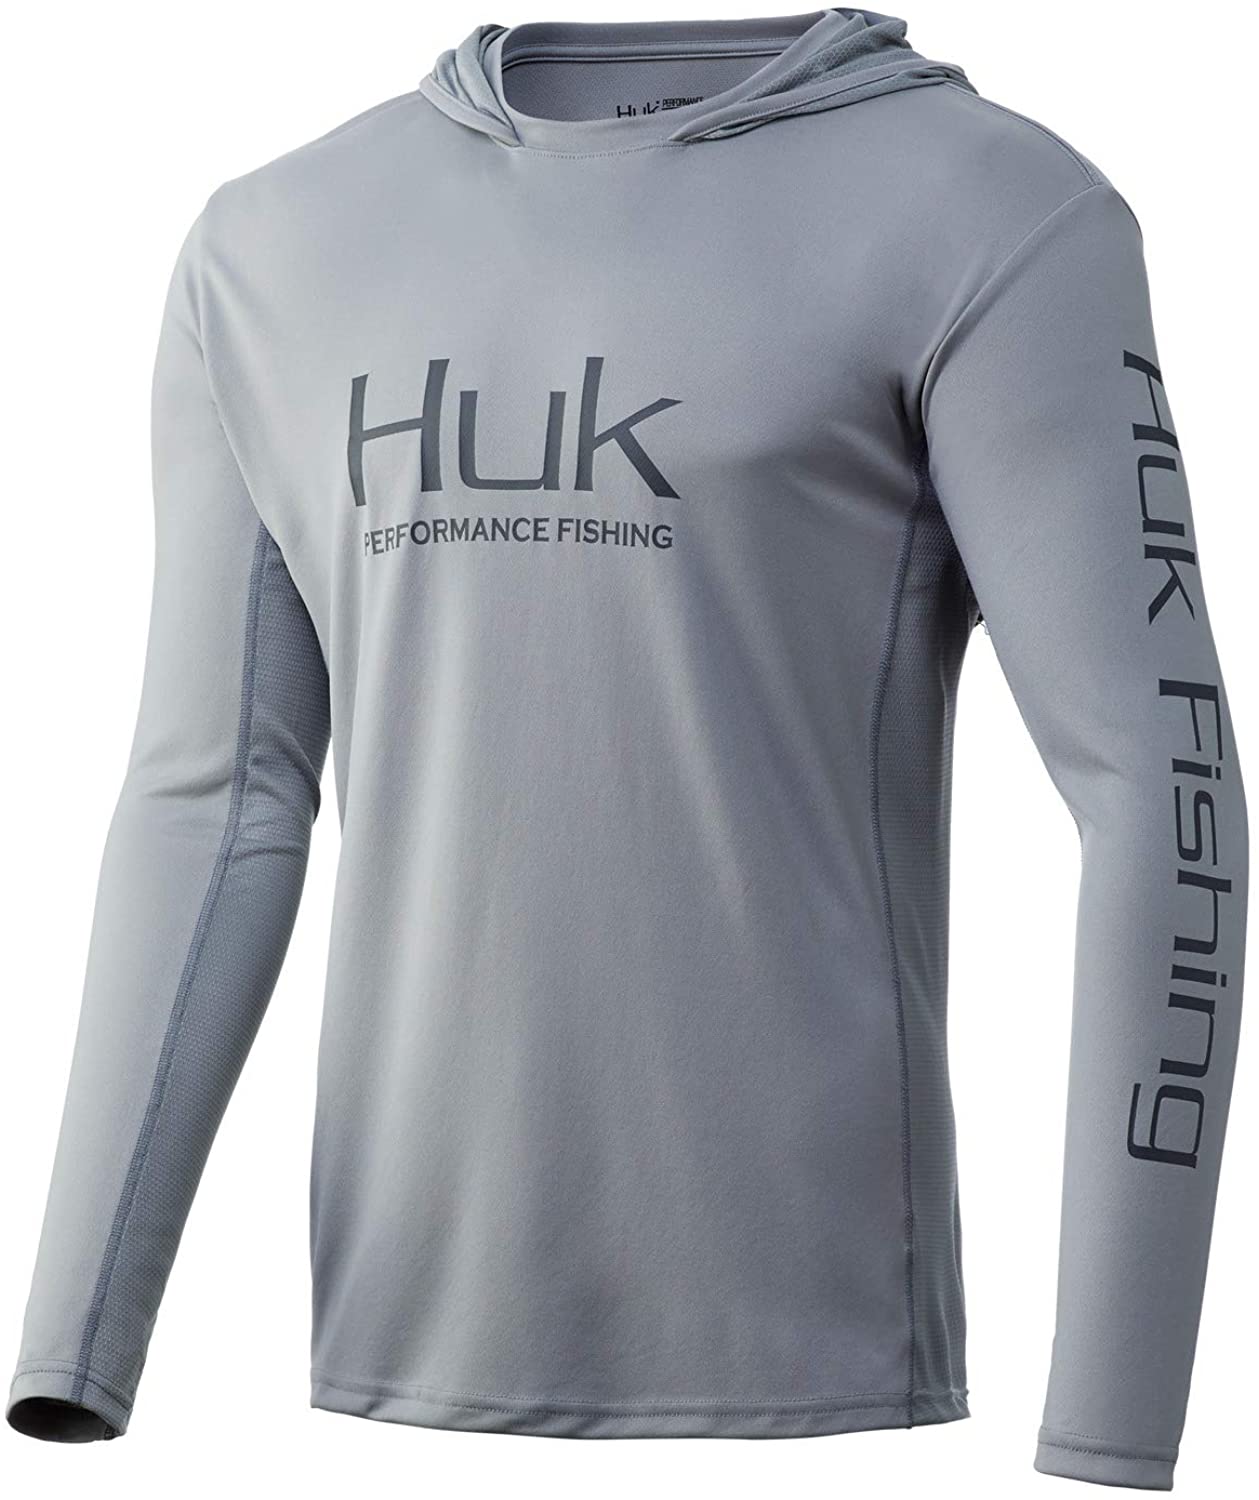 Huk ICON Performance X Fishing Mens Vented Long Sleeved Shirt-New w/Tags-Size XL 